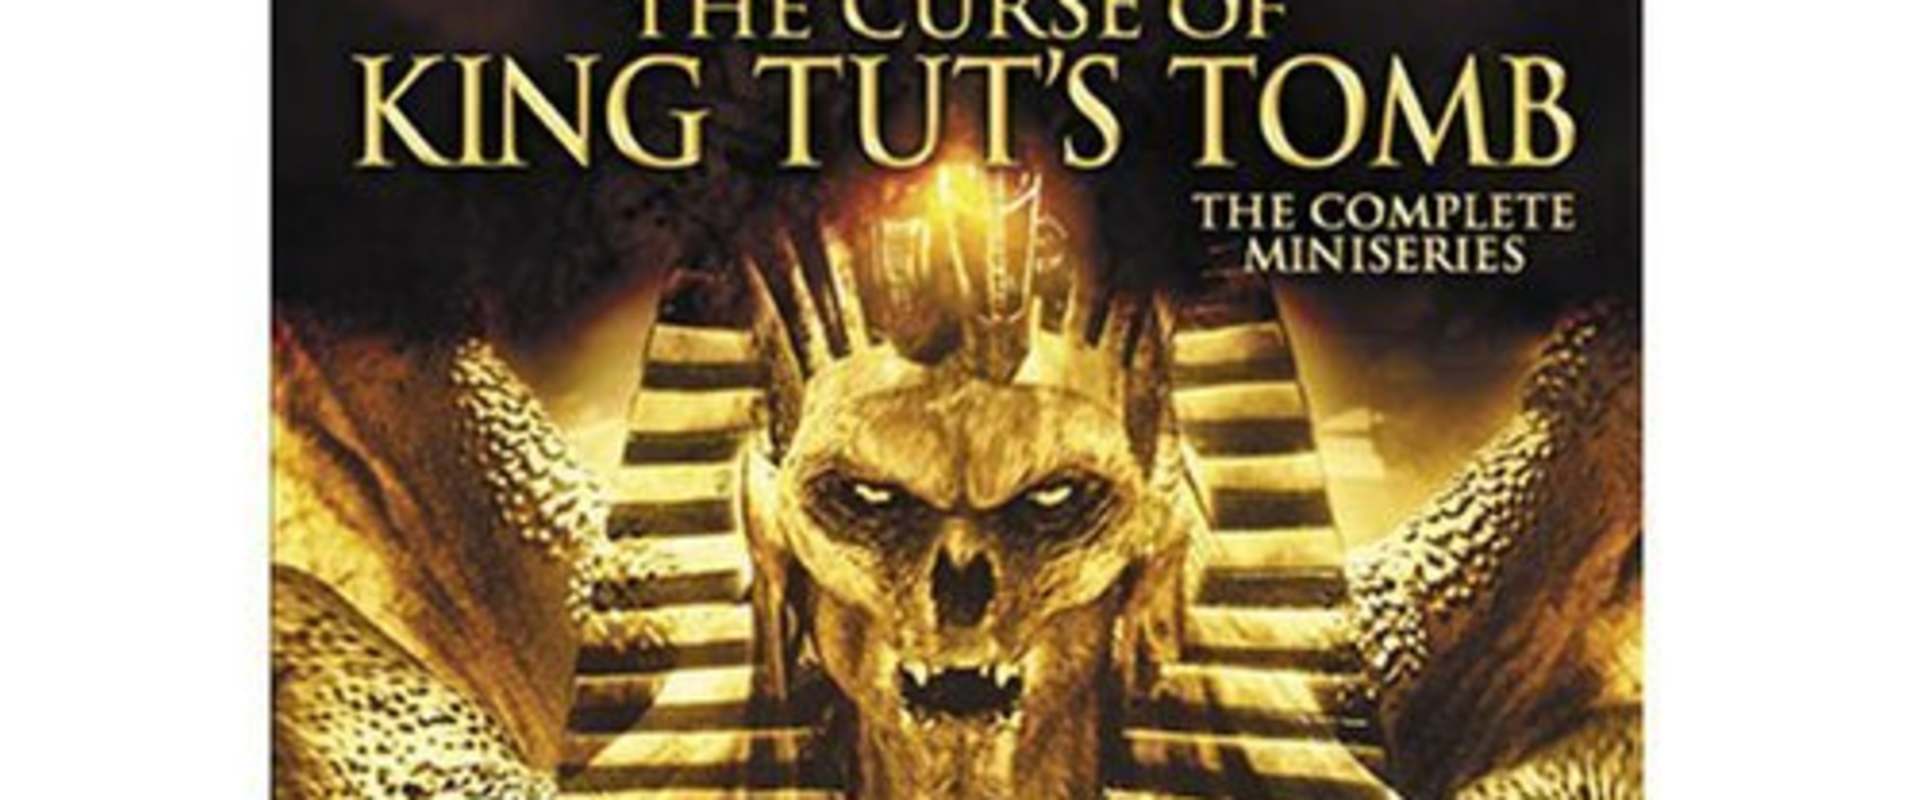 The Curse of King Tut's Tomb background 2